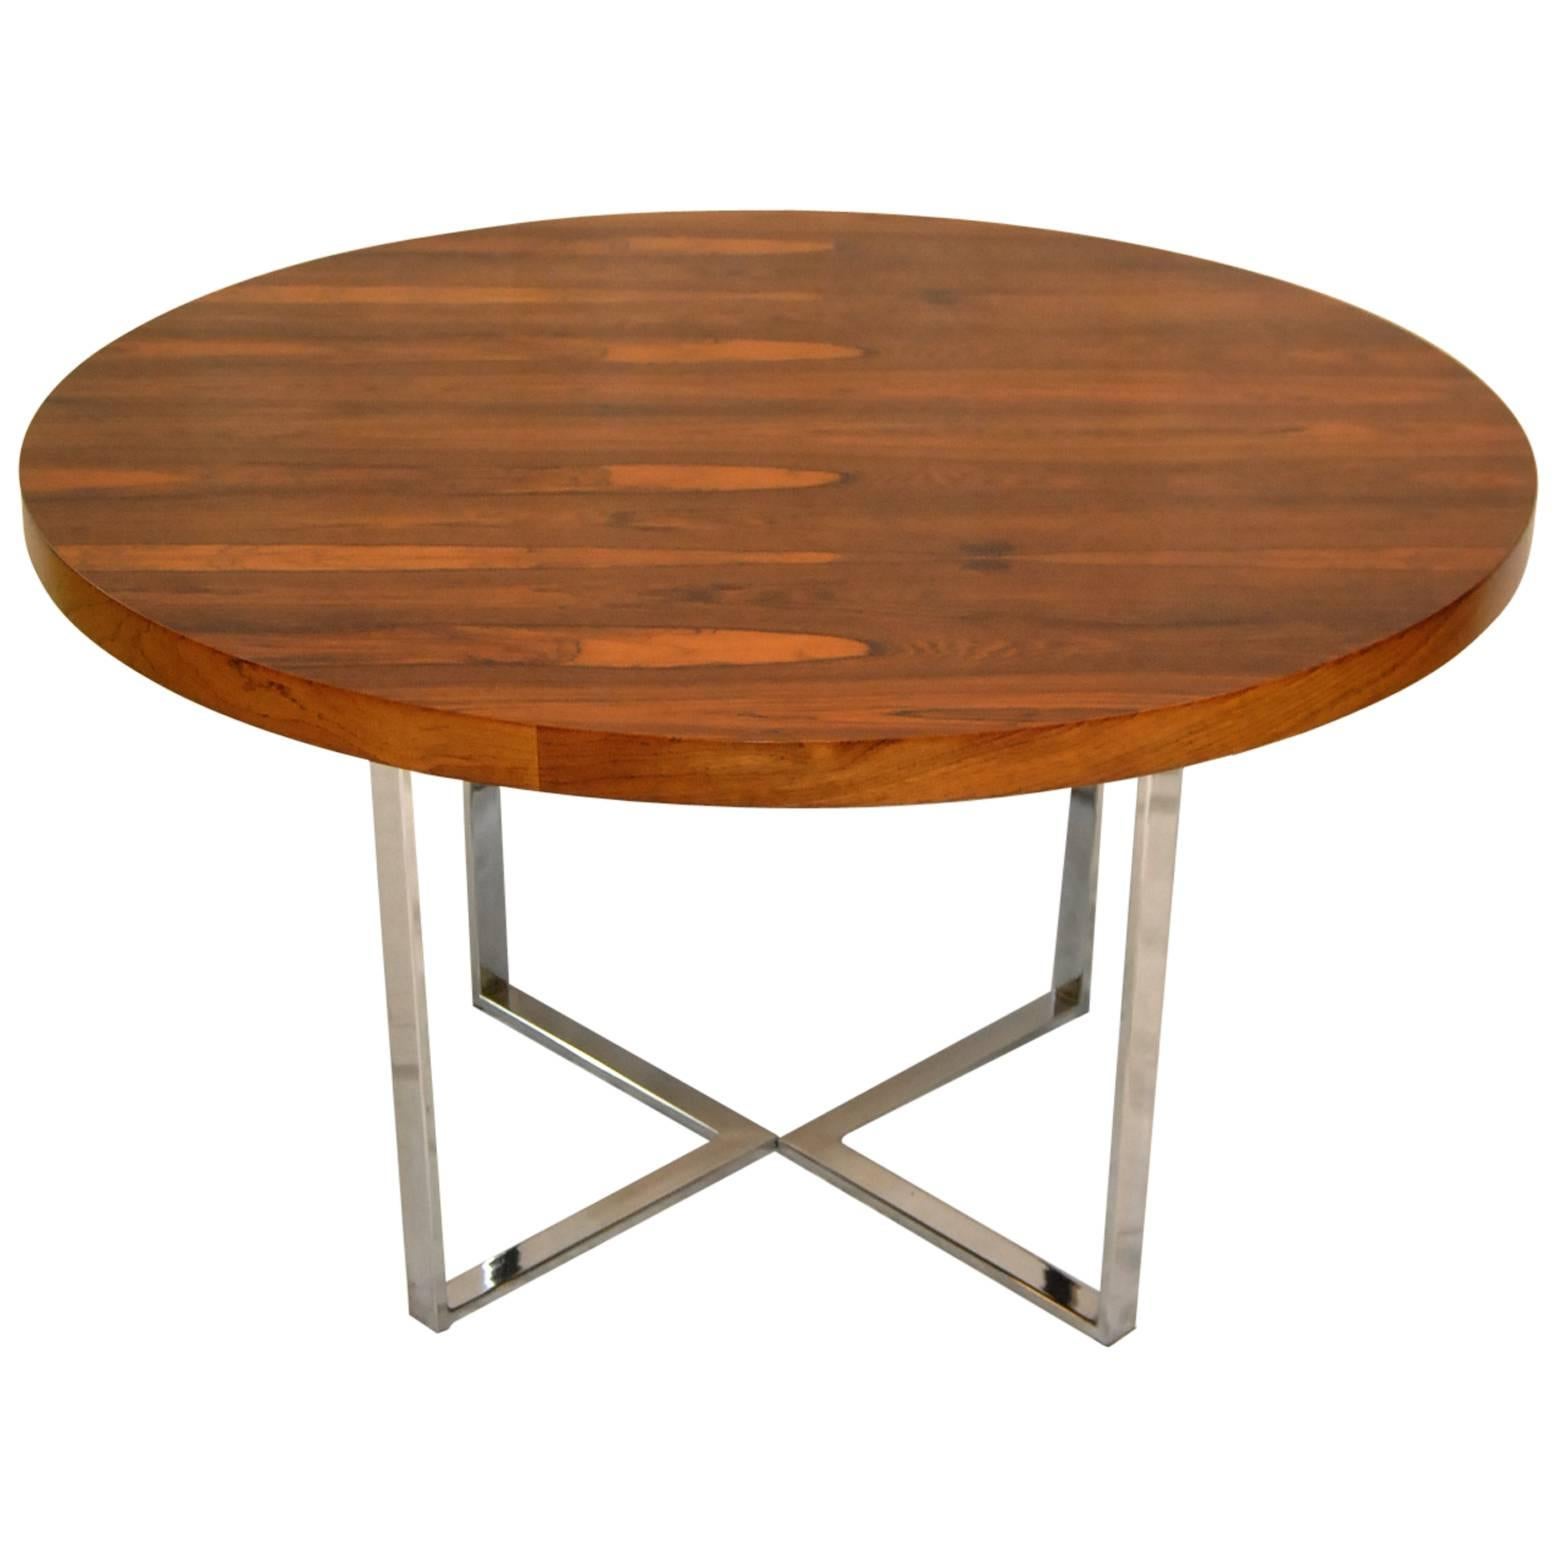 Mid-Century Modern Rosewood Table with Chrome "V" Base by Milo Baughman